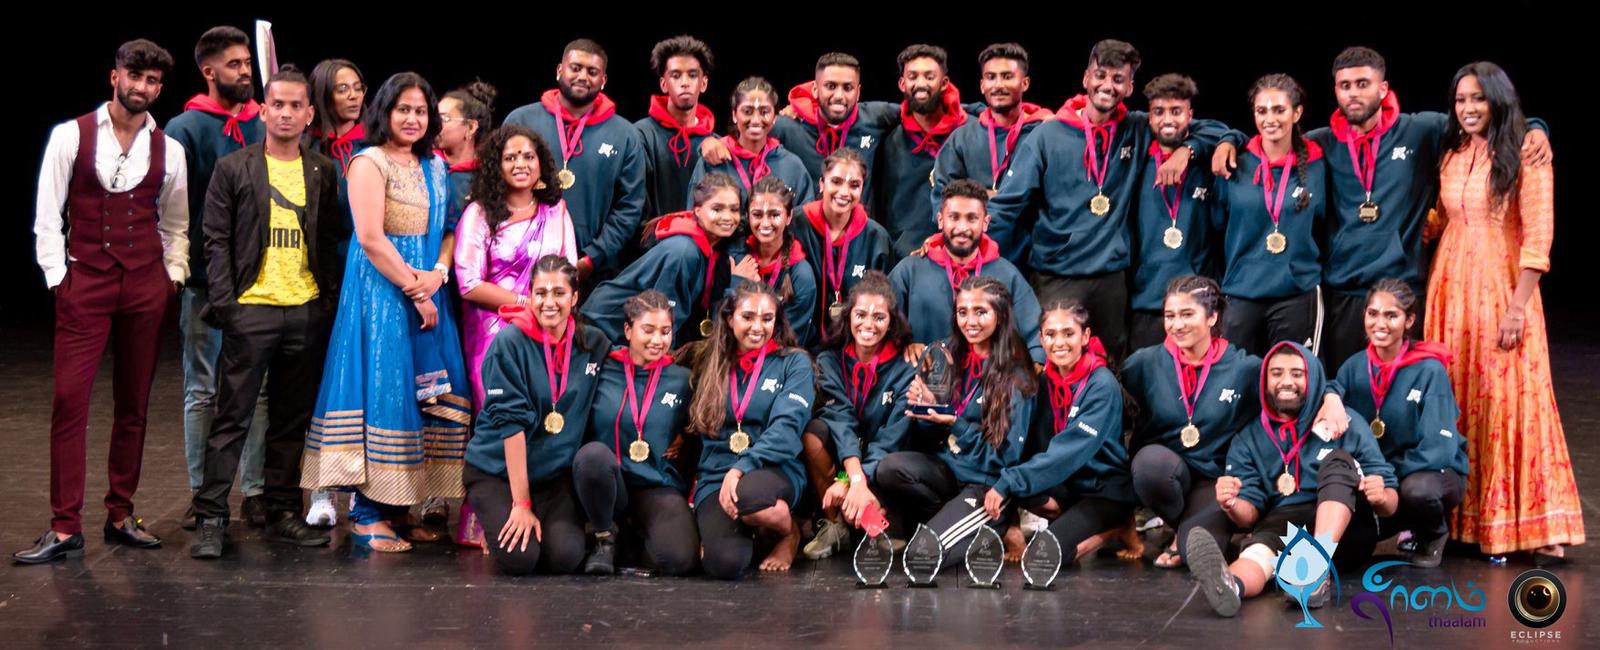 Thaalam 2019 Champions and recipients of Best Choreography Award, Best Theme Award, Best Audio Mix Award and Best Cheersquad Award